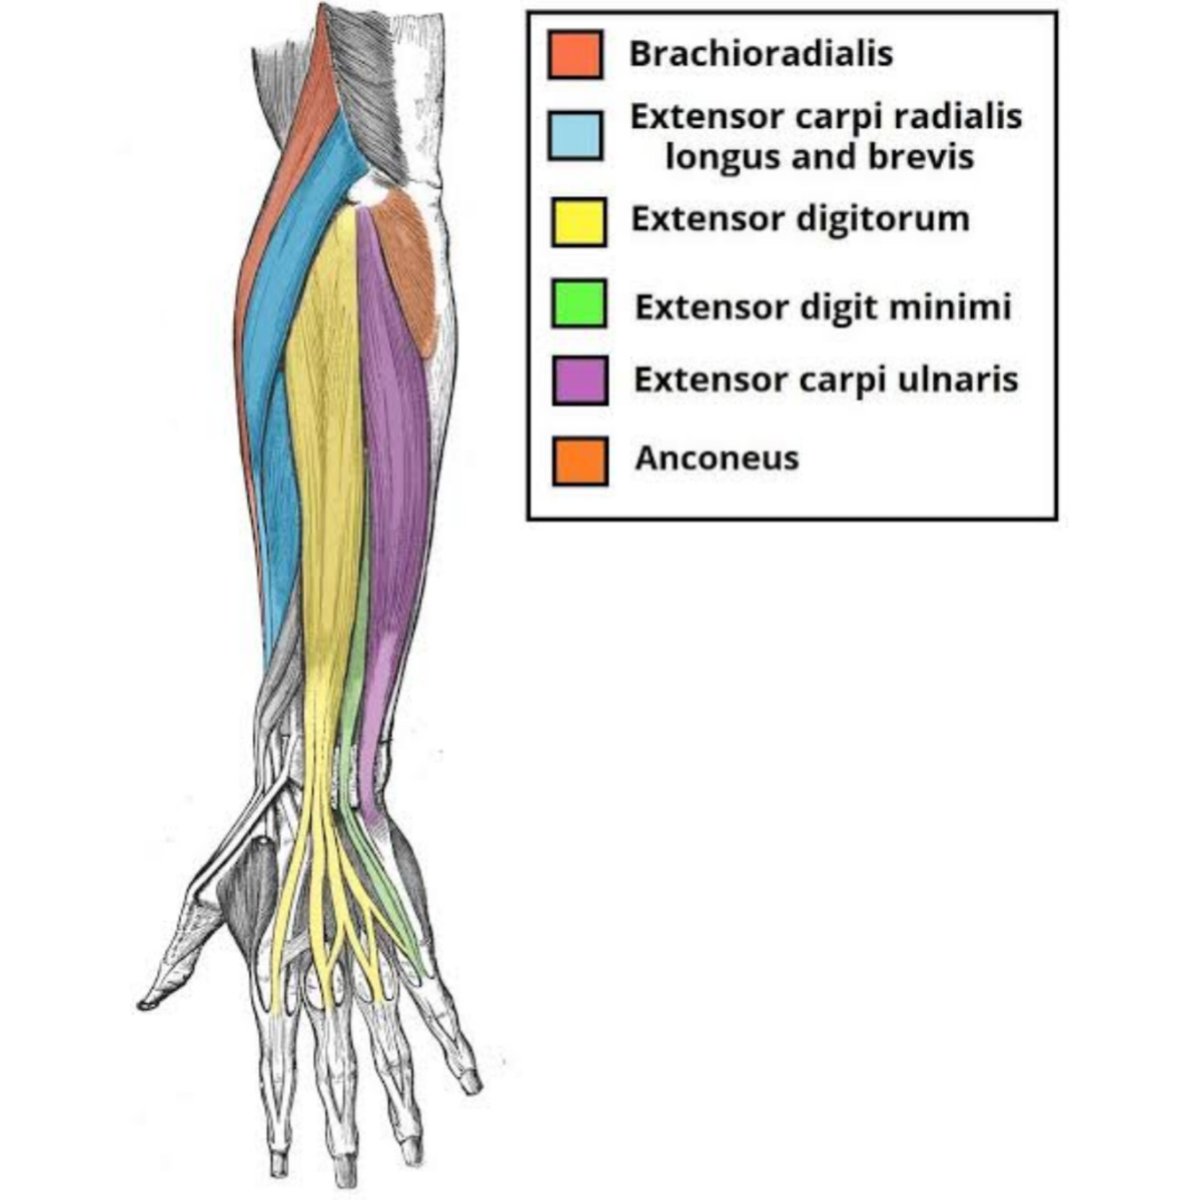 the superficial posterior forearm compartment involves few muscles. they function to flex the forearm, extend, adduct & abduct the wrist & extend digits 2-5. they're innervated by the radial & interosseous nerve & are supplied by the deep brachial, radial & interosseous artery.